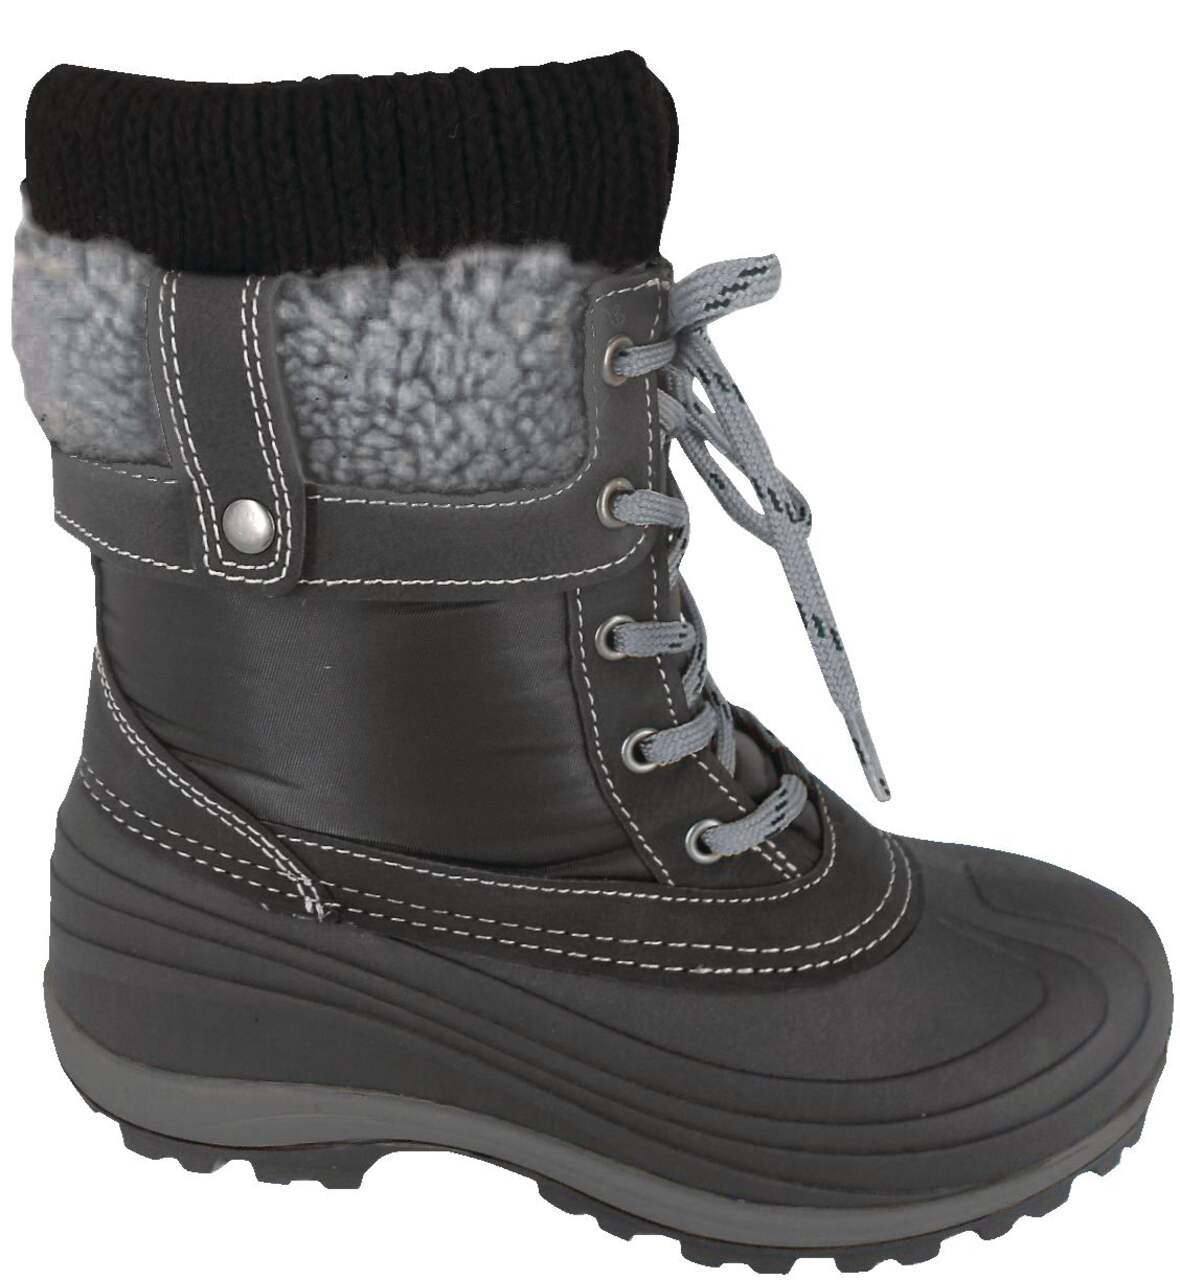 Outbound Women's Muskoka Insulated Water-Resistant Winter Snow Boots Cozy  Knit Cuff, Black